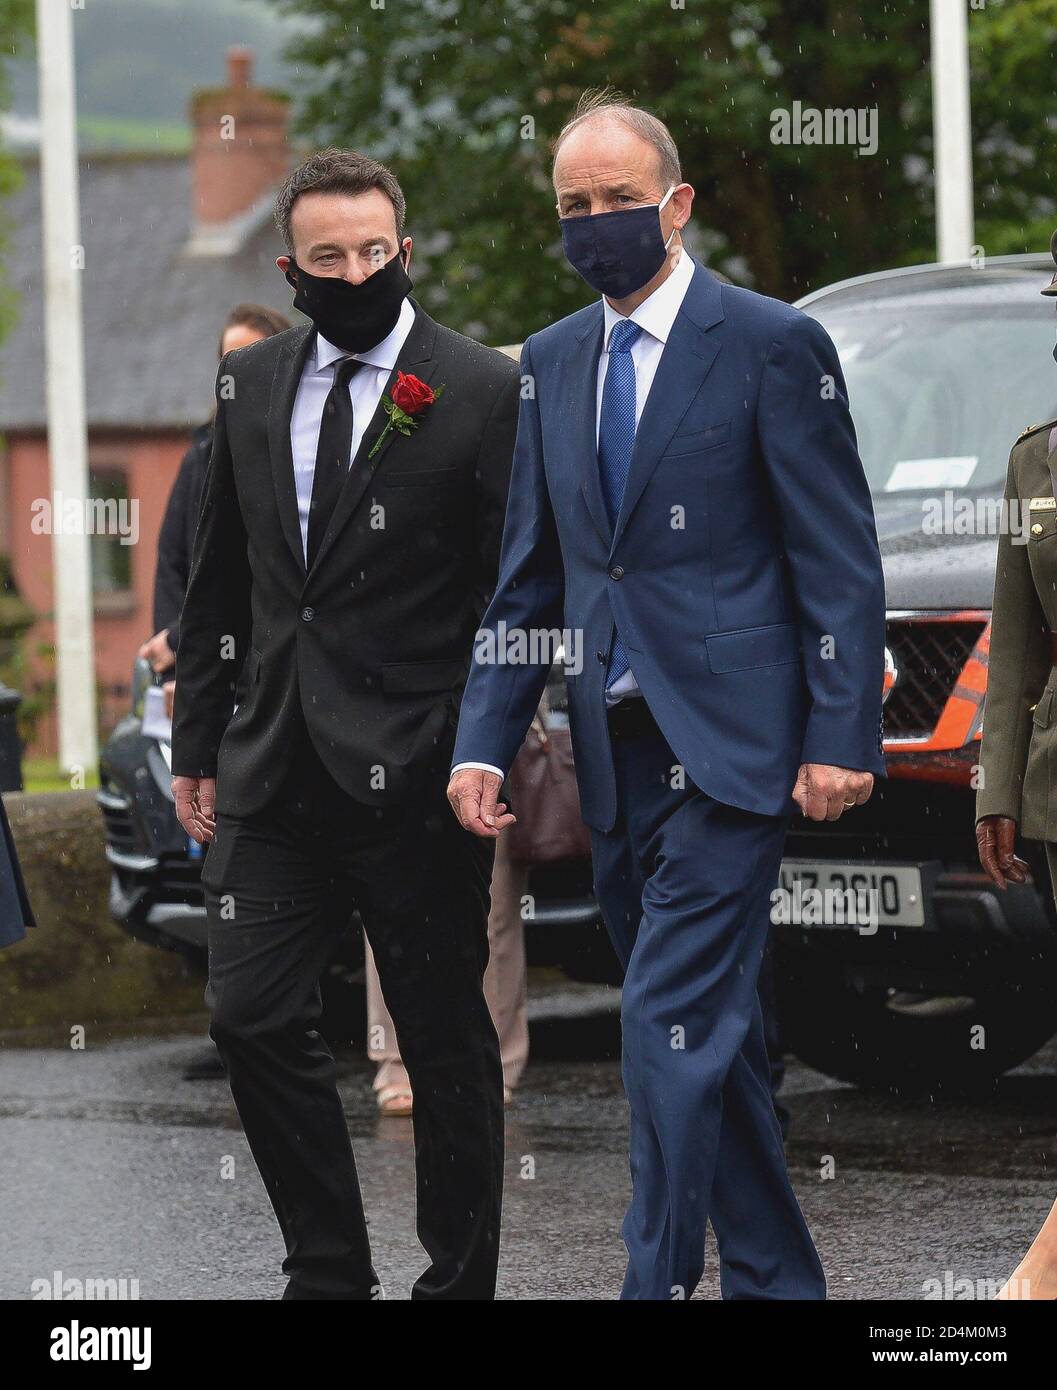 SDLP leader Colum Eastwood MP and Irish Taoiseach Micheál Martin wearing face masks at the funeral of John Hume in Derry. ©George Sweeney / Alamy Stock Photo Stock Photo